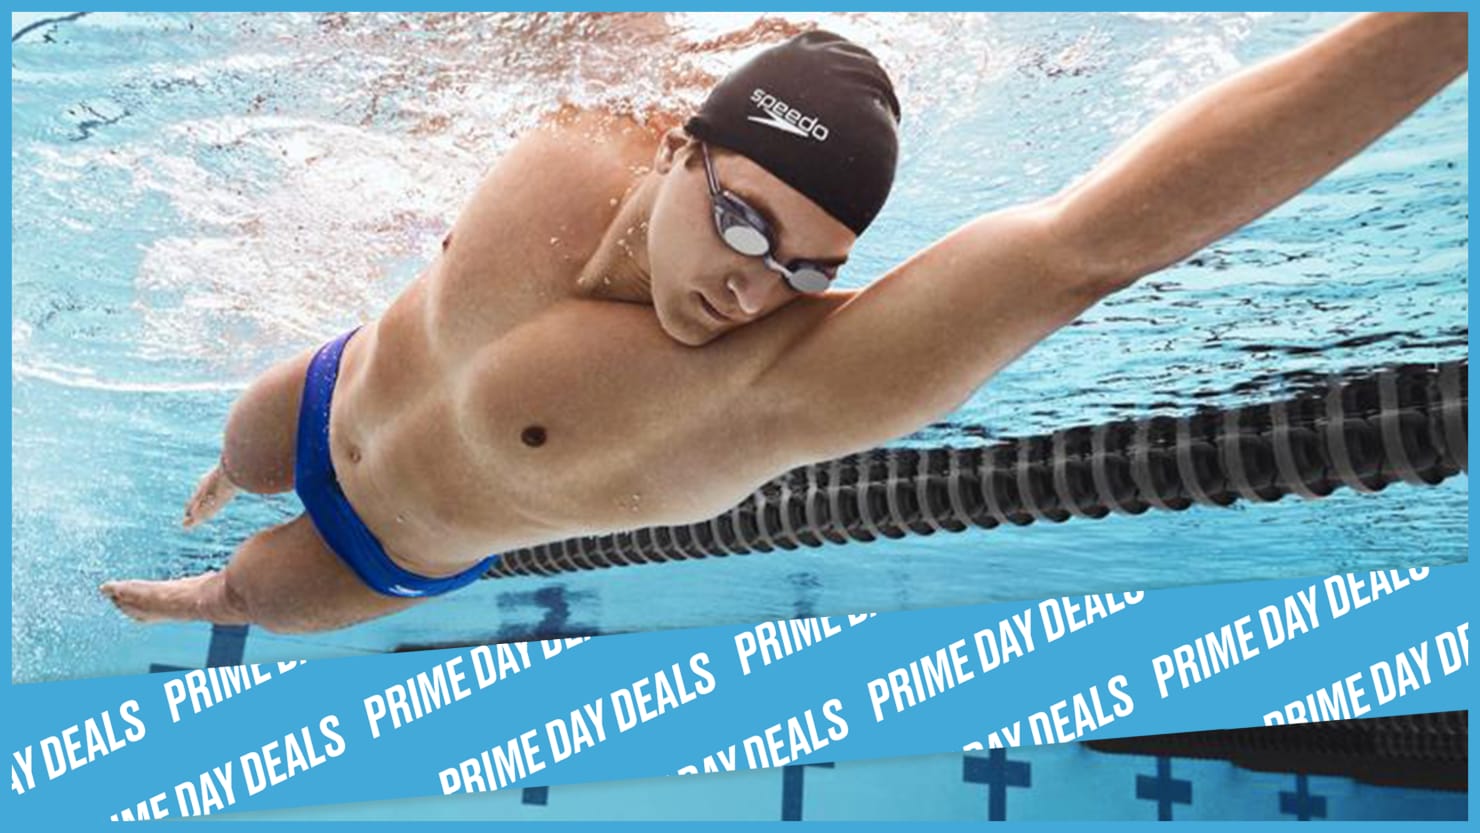 Shop Swim Gear - Swimsuits, Equipment & More - Best Price at DICK'S